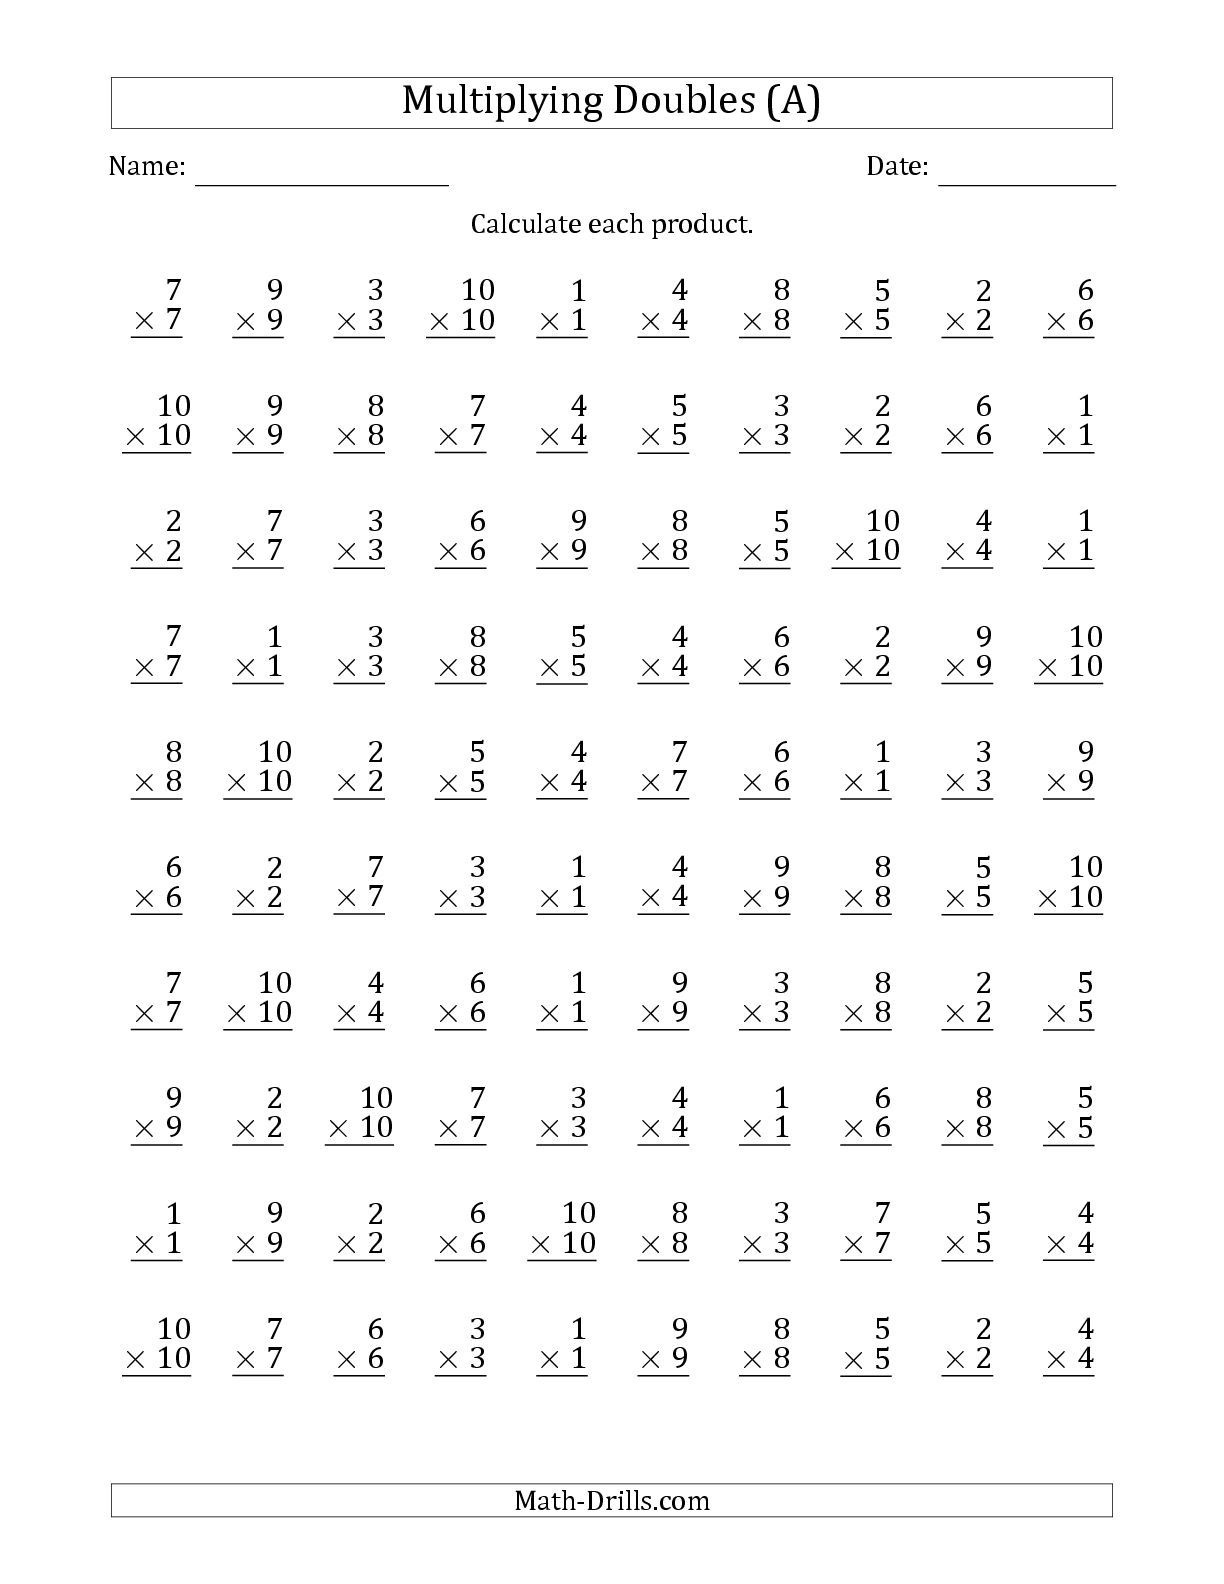 The Multiplying Doubles From 1 To 10 With 100 Questions Per Page (A - Free Printable Multiplication Worksheets 100 Problems